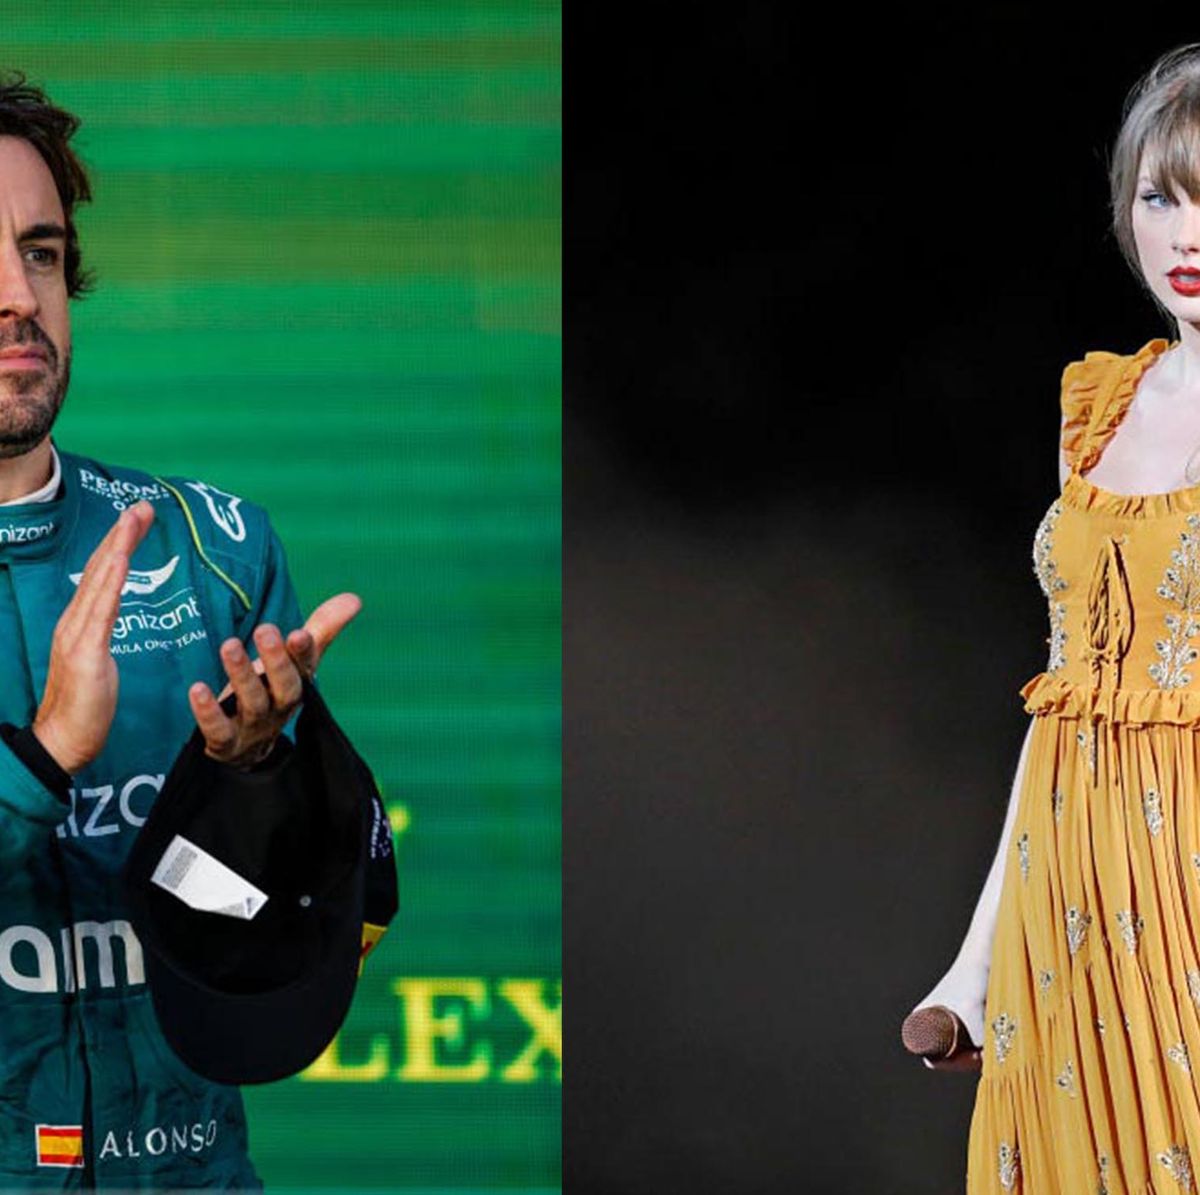 Fernando Alonso goes public with stunning new girlfriend Andrea